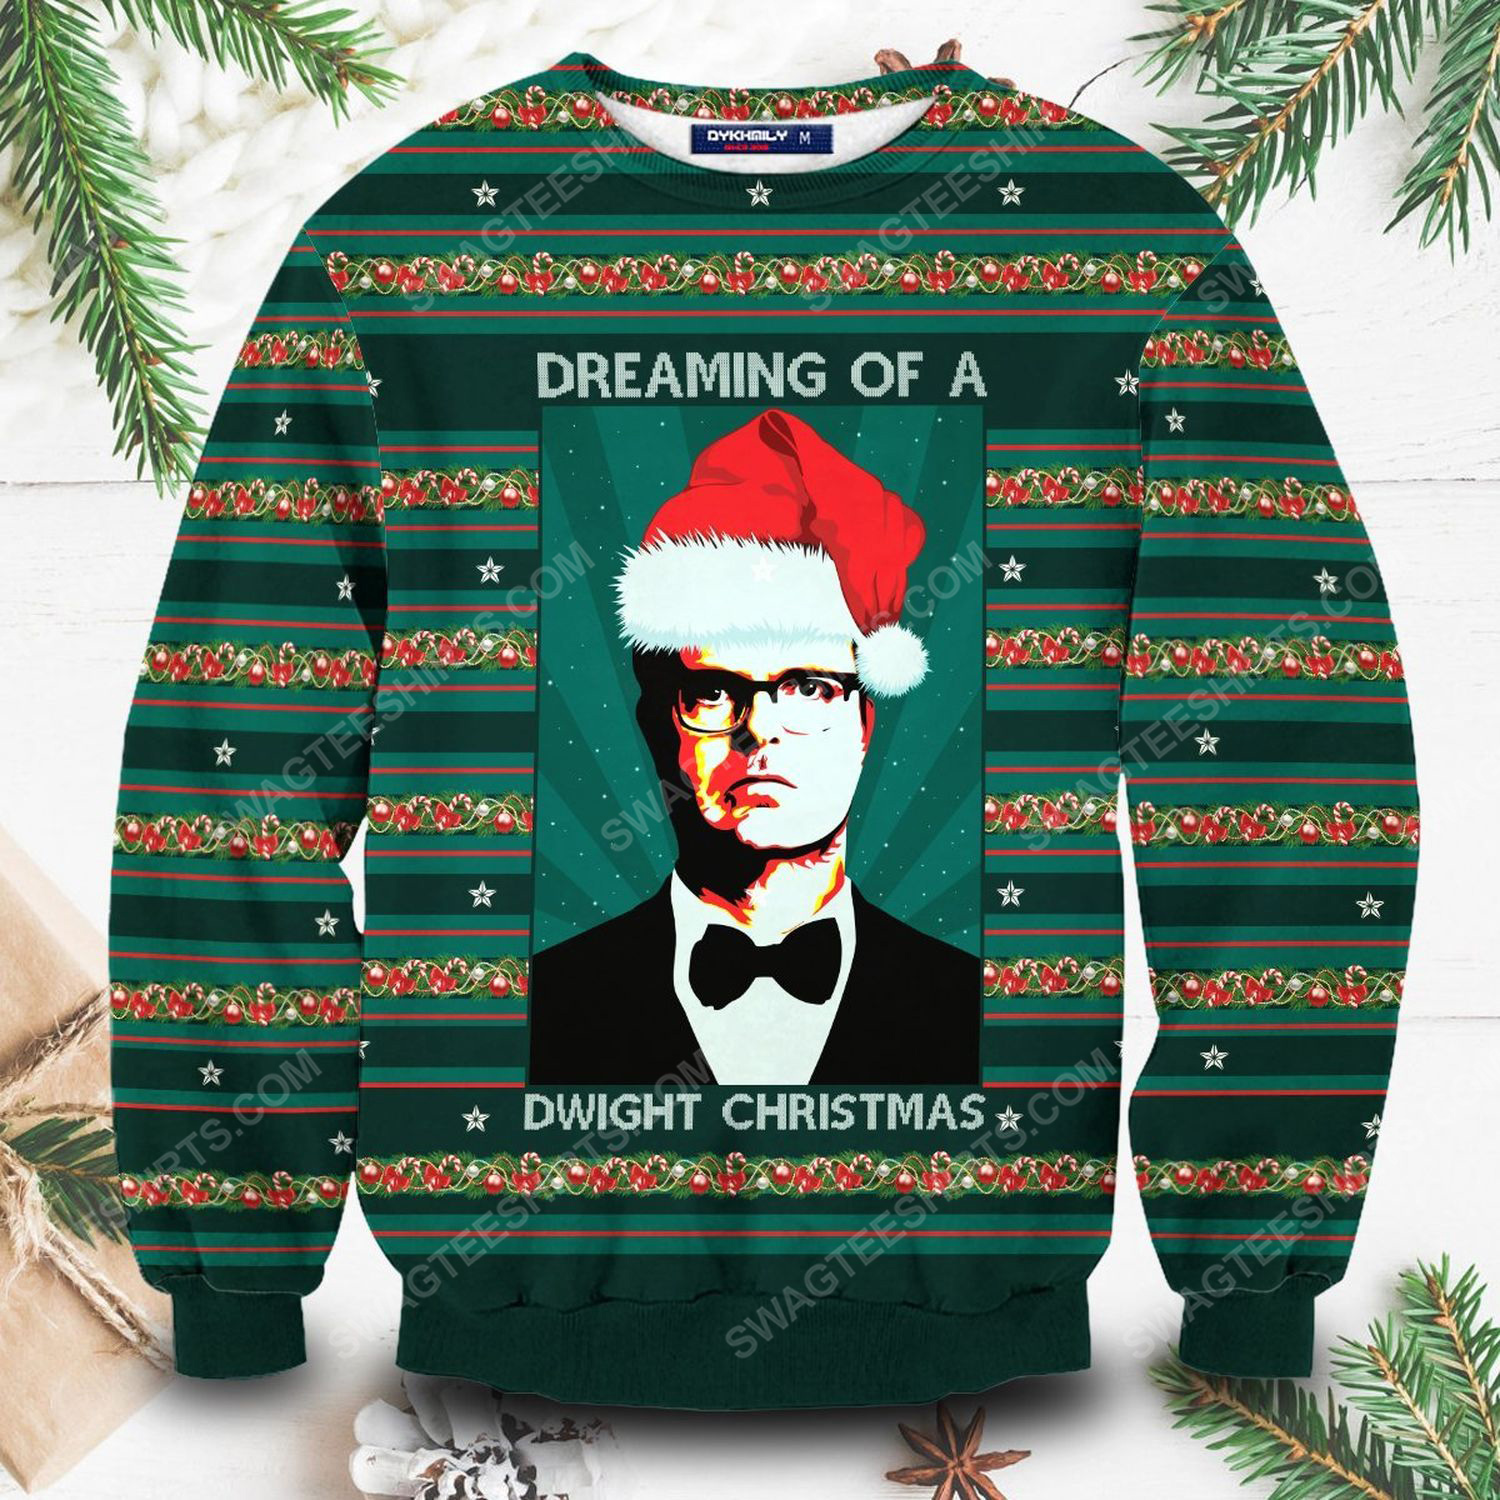 The office dreaming of a dwight christmas ugly christmas sweater 2